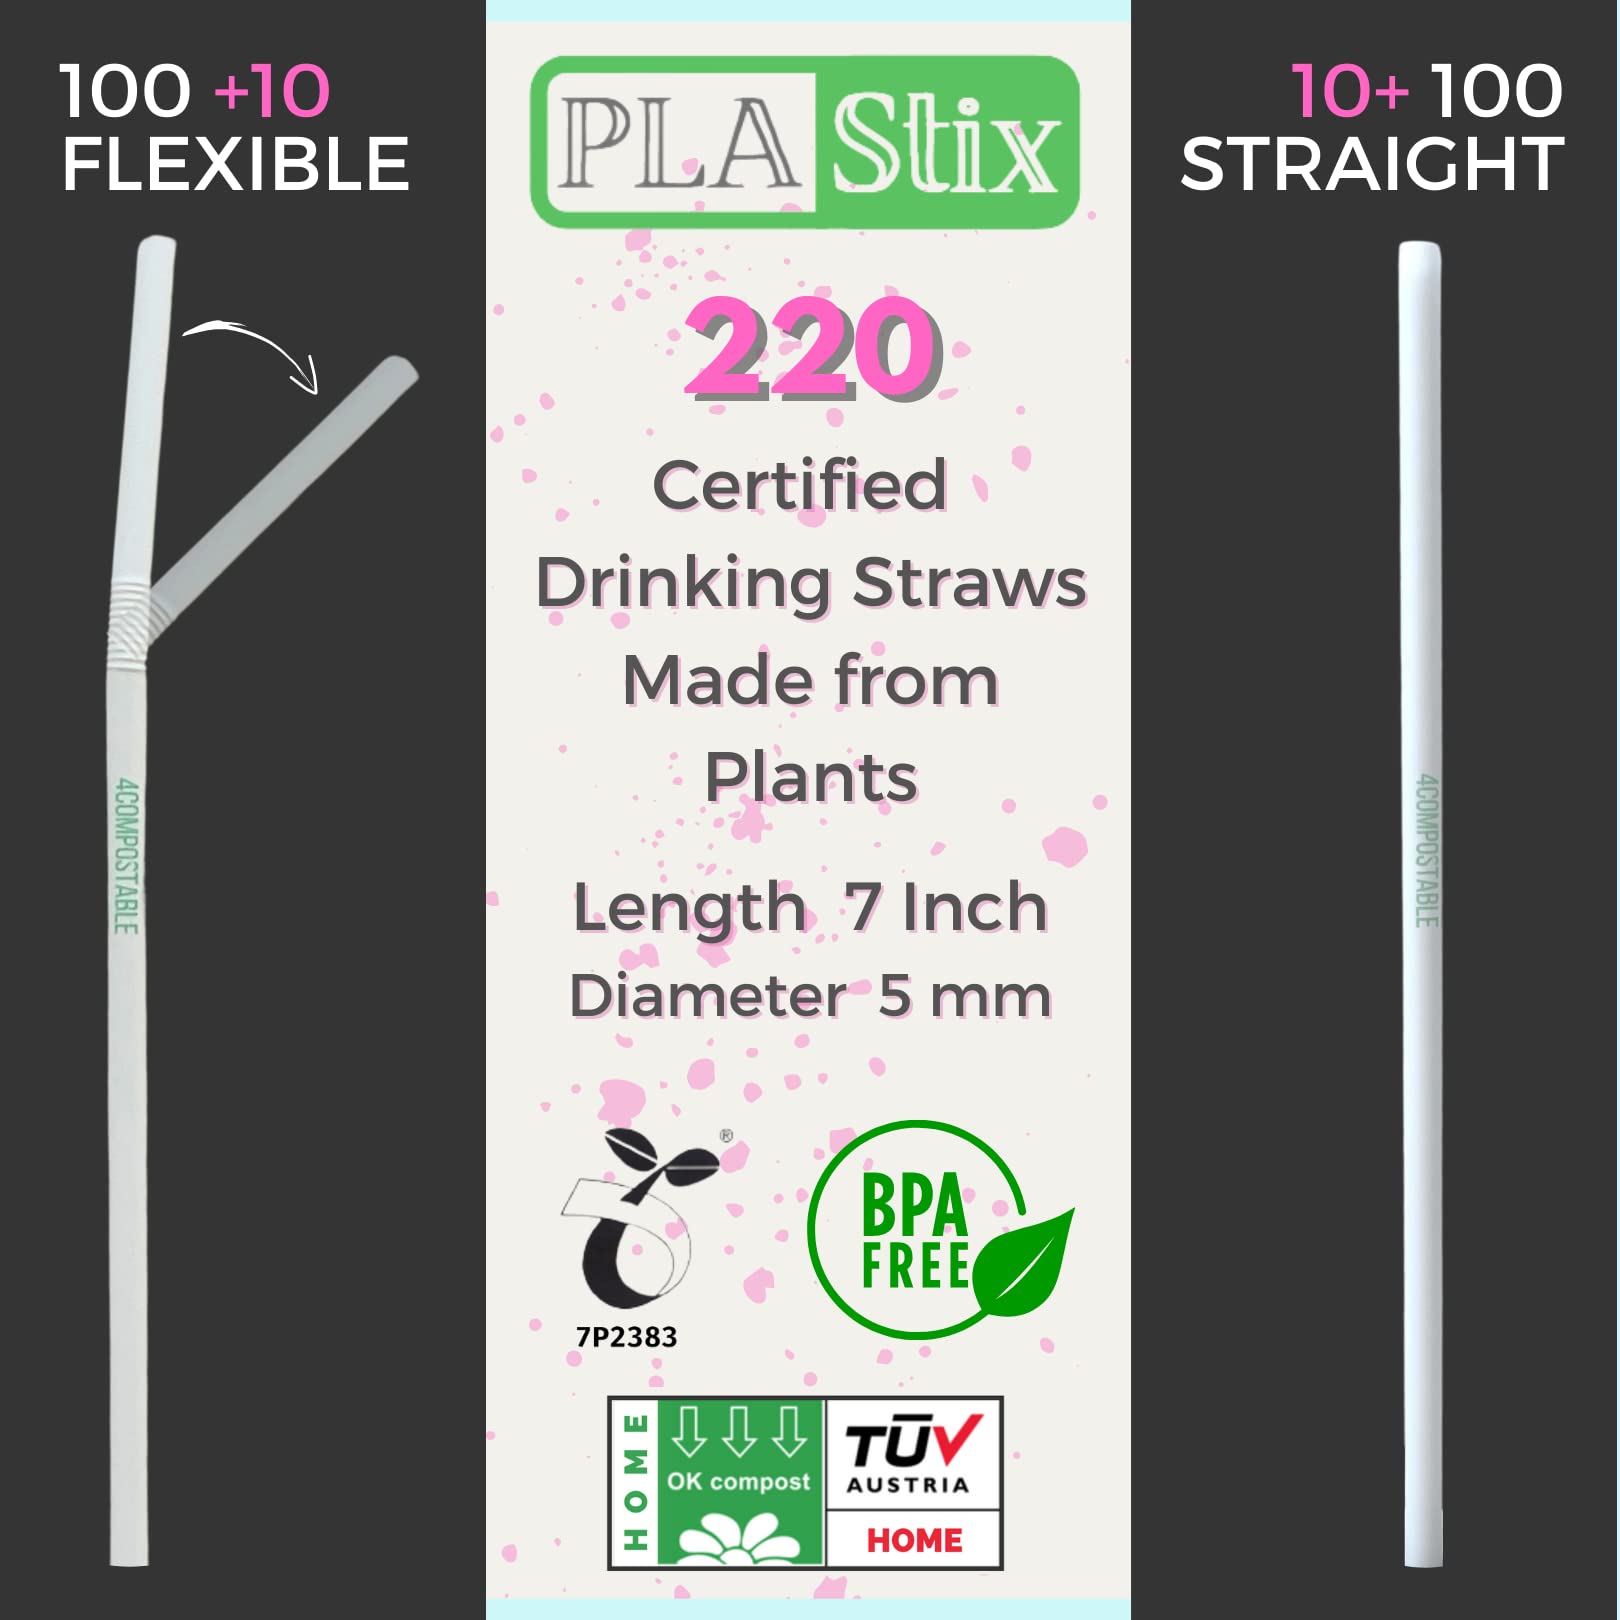 PLA Stix Compostable Drinking Straws - 200 [+20] White Disposable Straws: Bendy + Straight, 7 Inch Non-Plastic Reusable Straws made from Plants